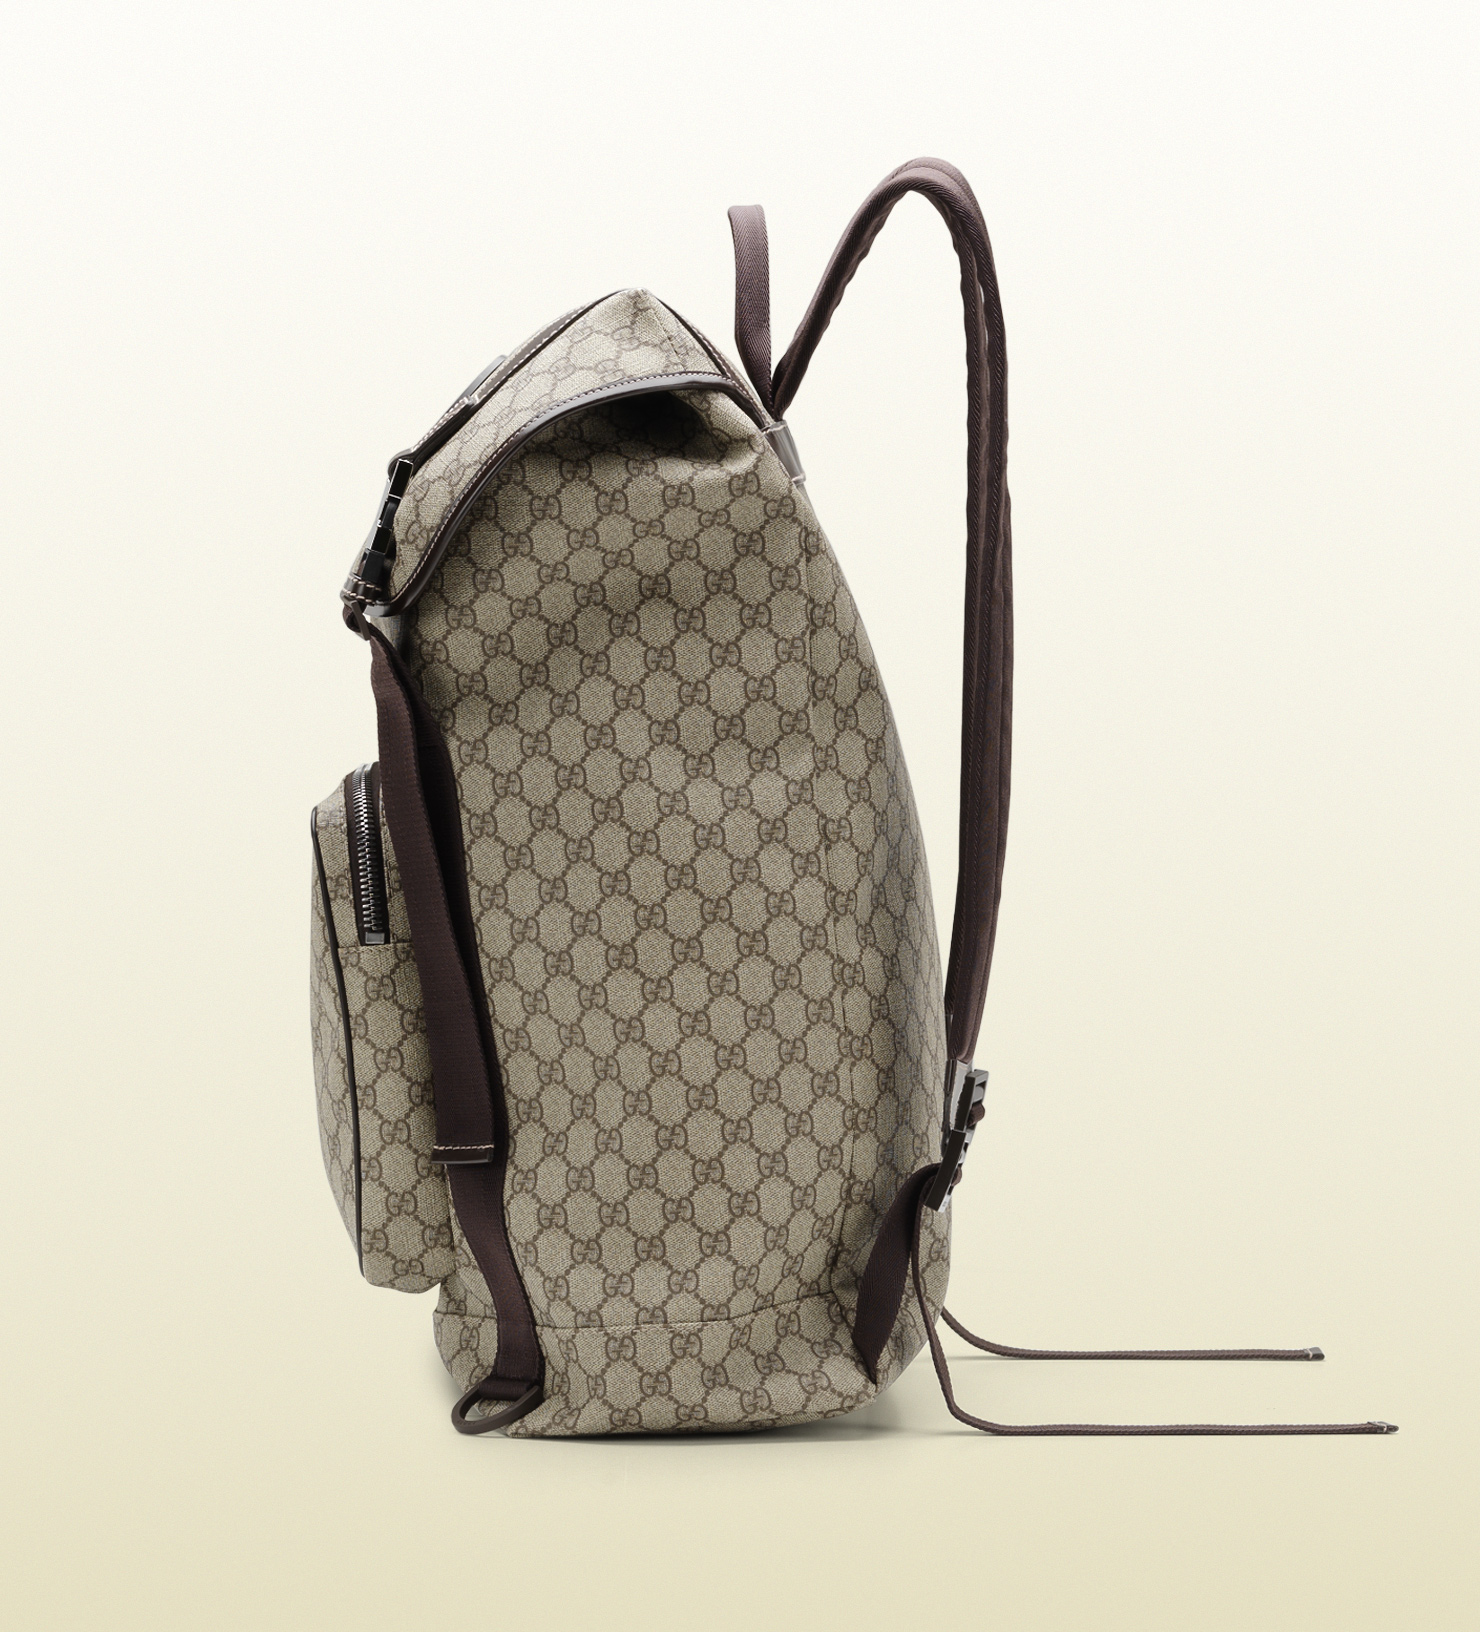 Gucci Gg Supreme Canvas Interlocking G Backpack in Beige (Gray) for Men - Lyst